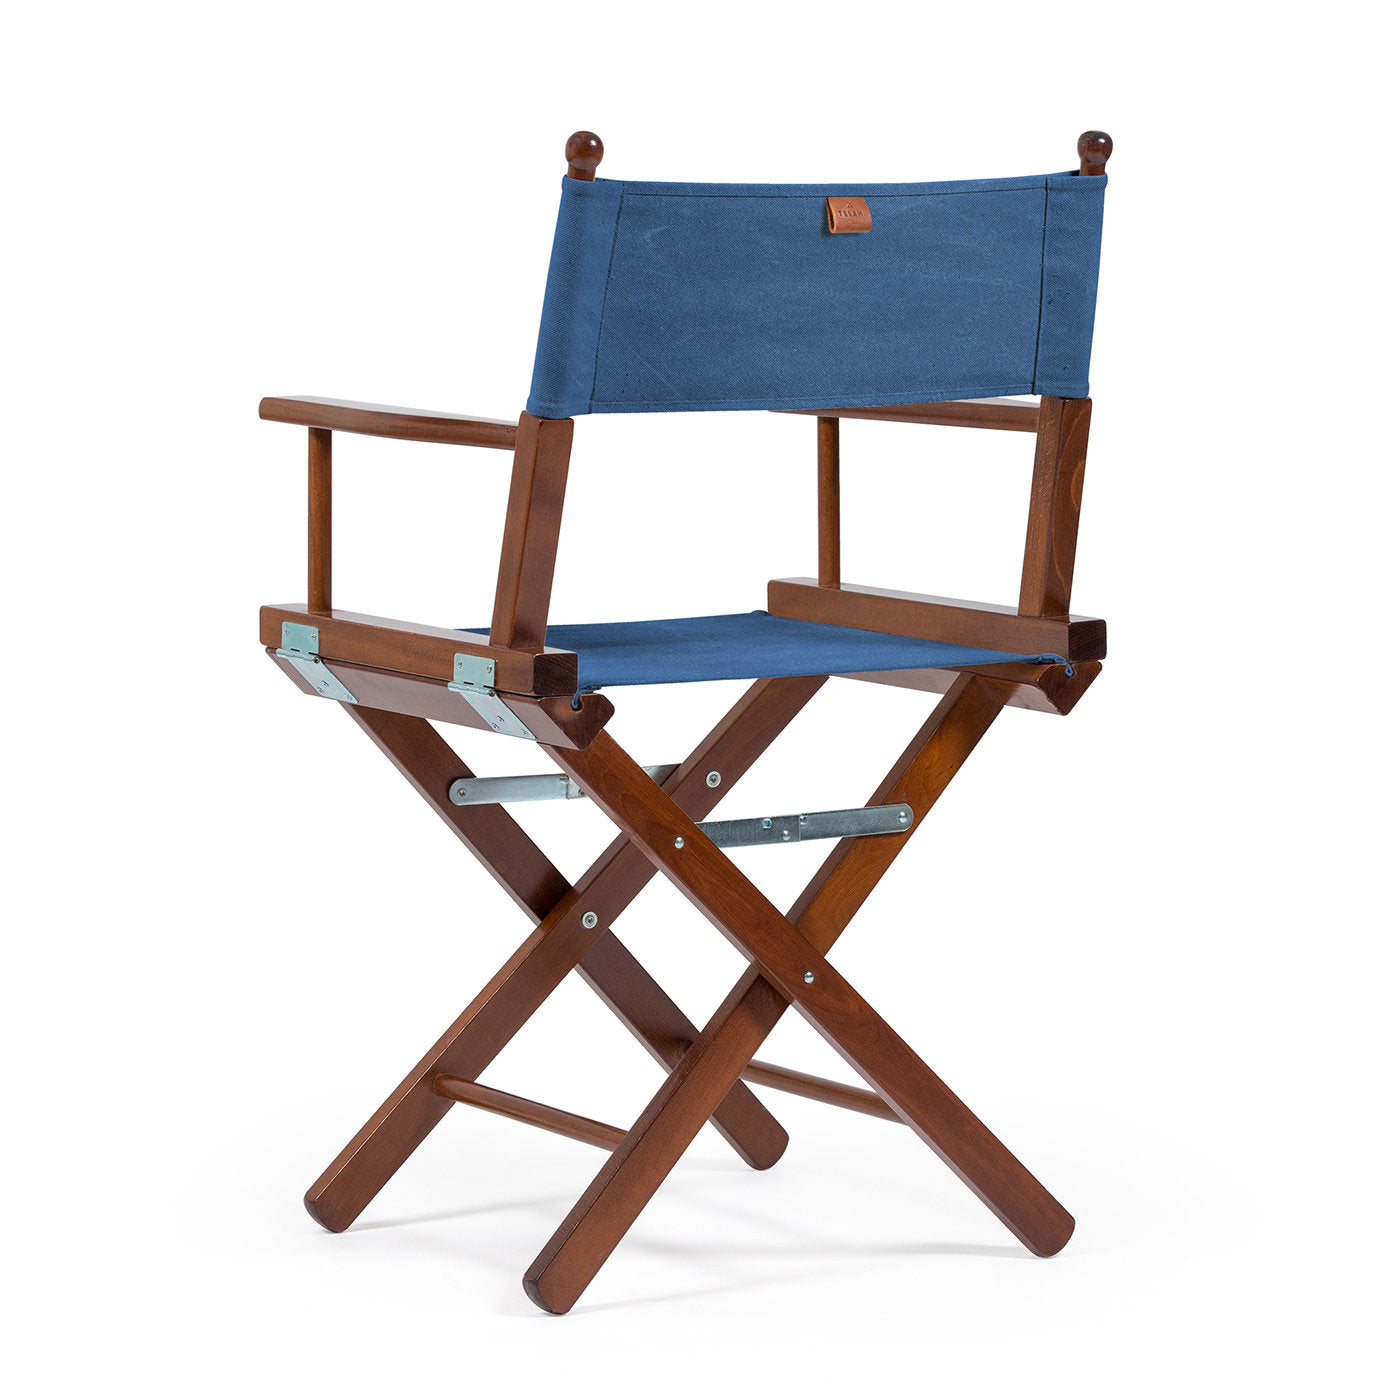 Director's Chair in Jeans Blue - Alternative view 2